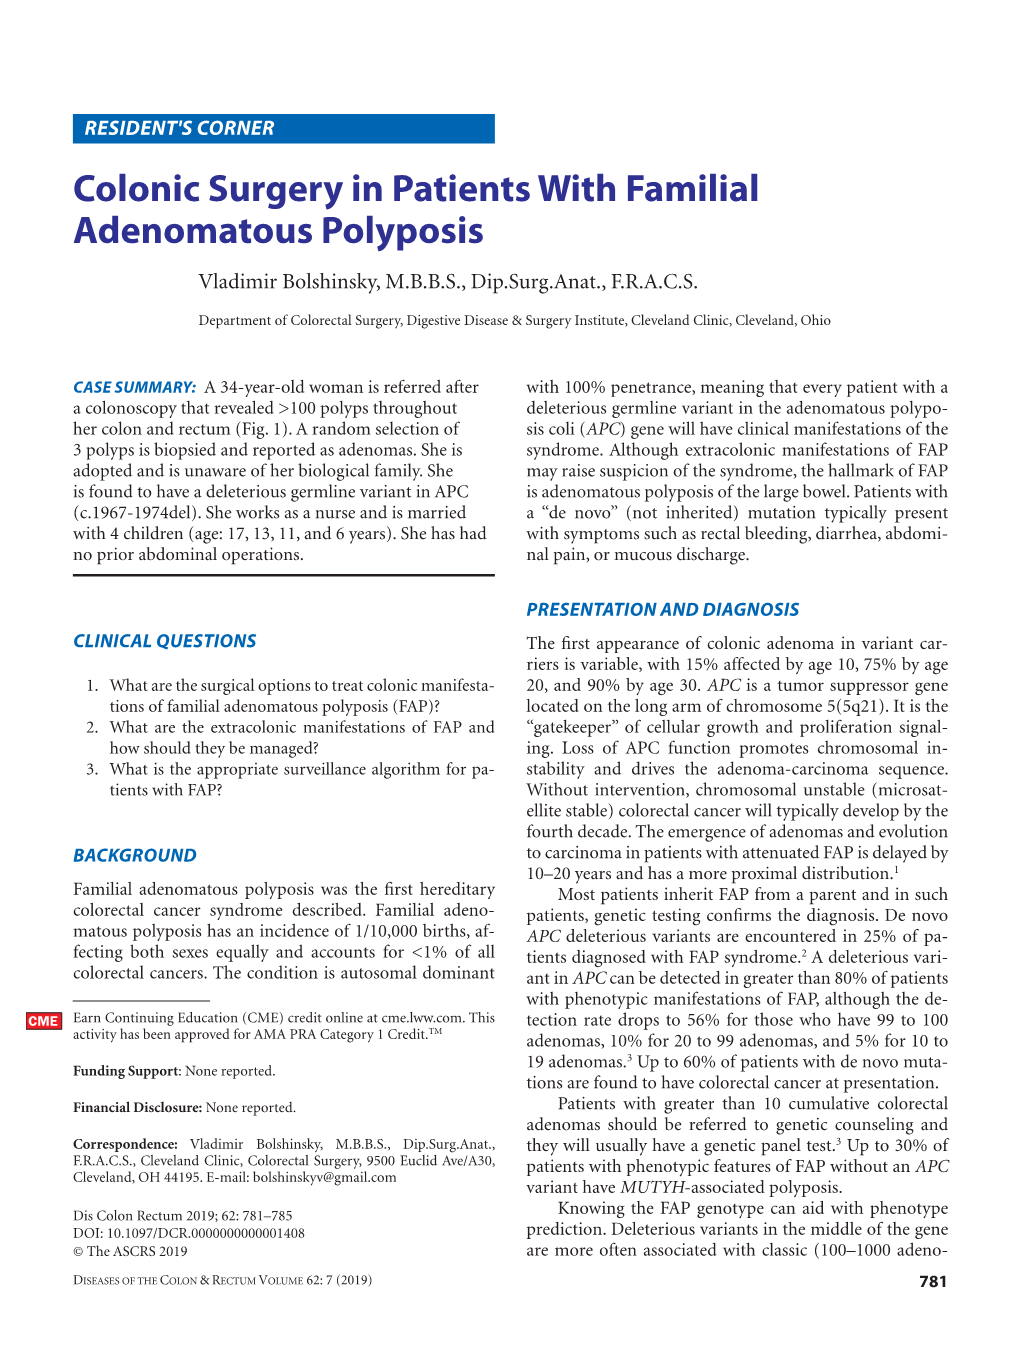 Colonic Surgery in Patients with Familial Adenomatous Polyposis Vladimir Bolshinsky, M.B.B.S., Dip.Surg.Anat., F.R.A.C.S